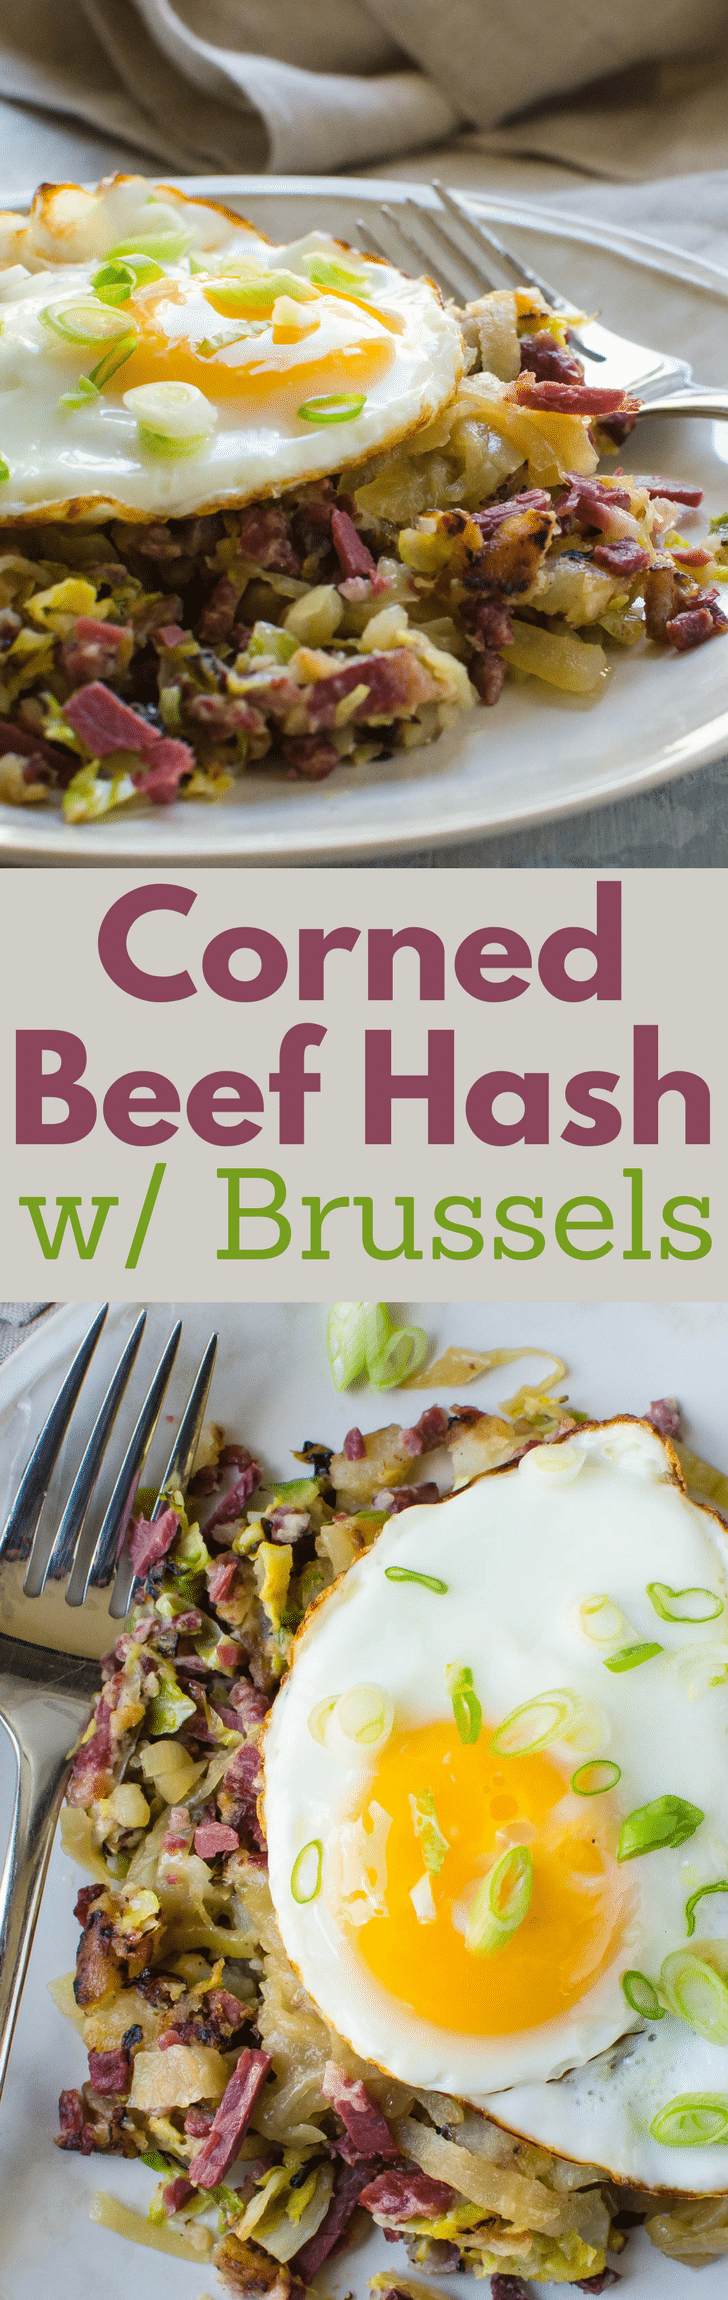 Wondering what to do with your leftover corned beef from St. Patrick's Day? This easy corned beef hash recipe is made from scratch with a few surprises. Corned Beef Hash with Shaved Brussels and caramelized onions is a delicious way to use up corned beef leftovers. #cornedbeef #leftovercornedbeef #homemadecornedbeefhash #cornedbeefhash #flannelhash #hash #hashandeggs #brusselssprouts #caramelizedonions #potatoes #potatohash #skilletdinners #skilletdinner #brunch #breakfast #onepanmeals #easyhash #easycornedbeefhash #easterbrunch #saintpatricksday, #cornedbeef, #eggs, #friedeggs #eggsovereasy #sunnysideupeggs